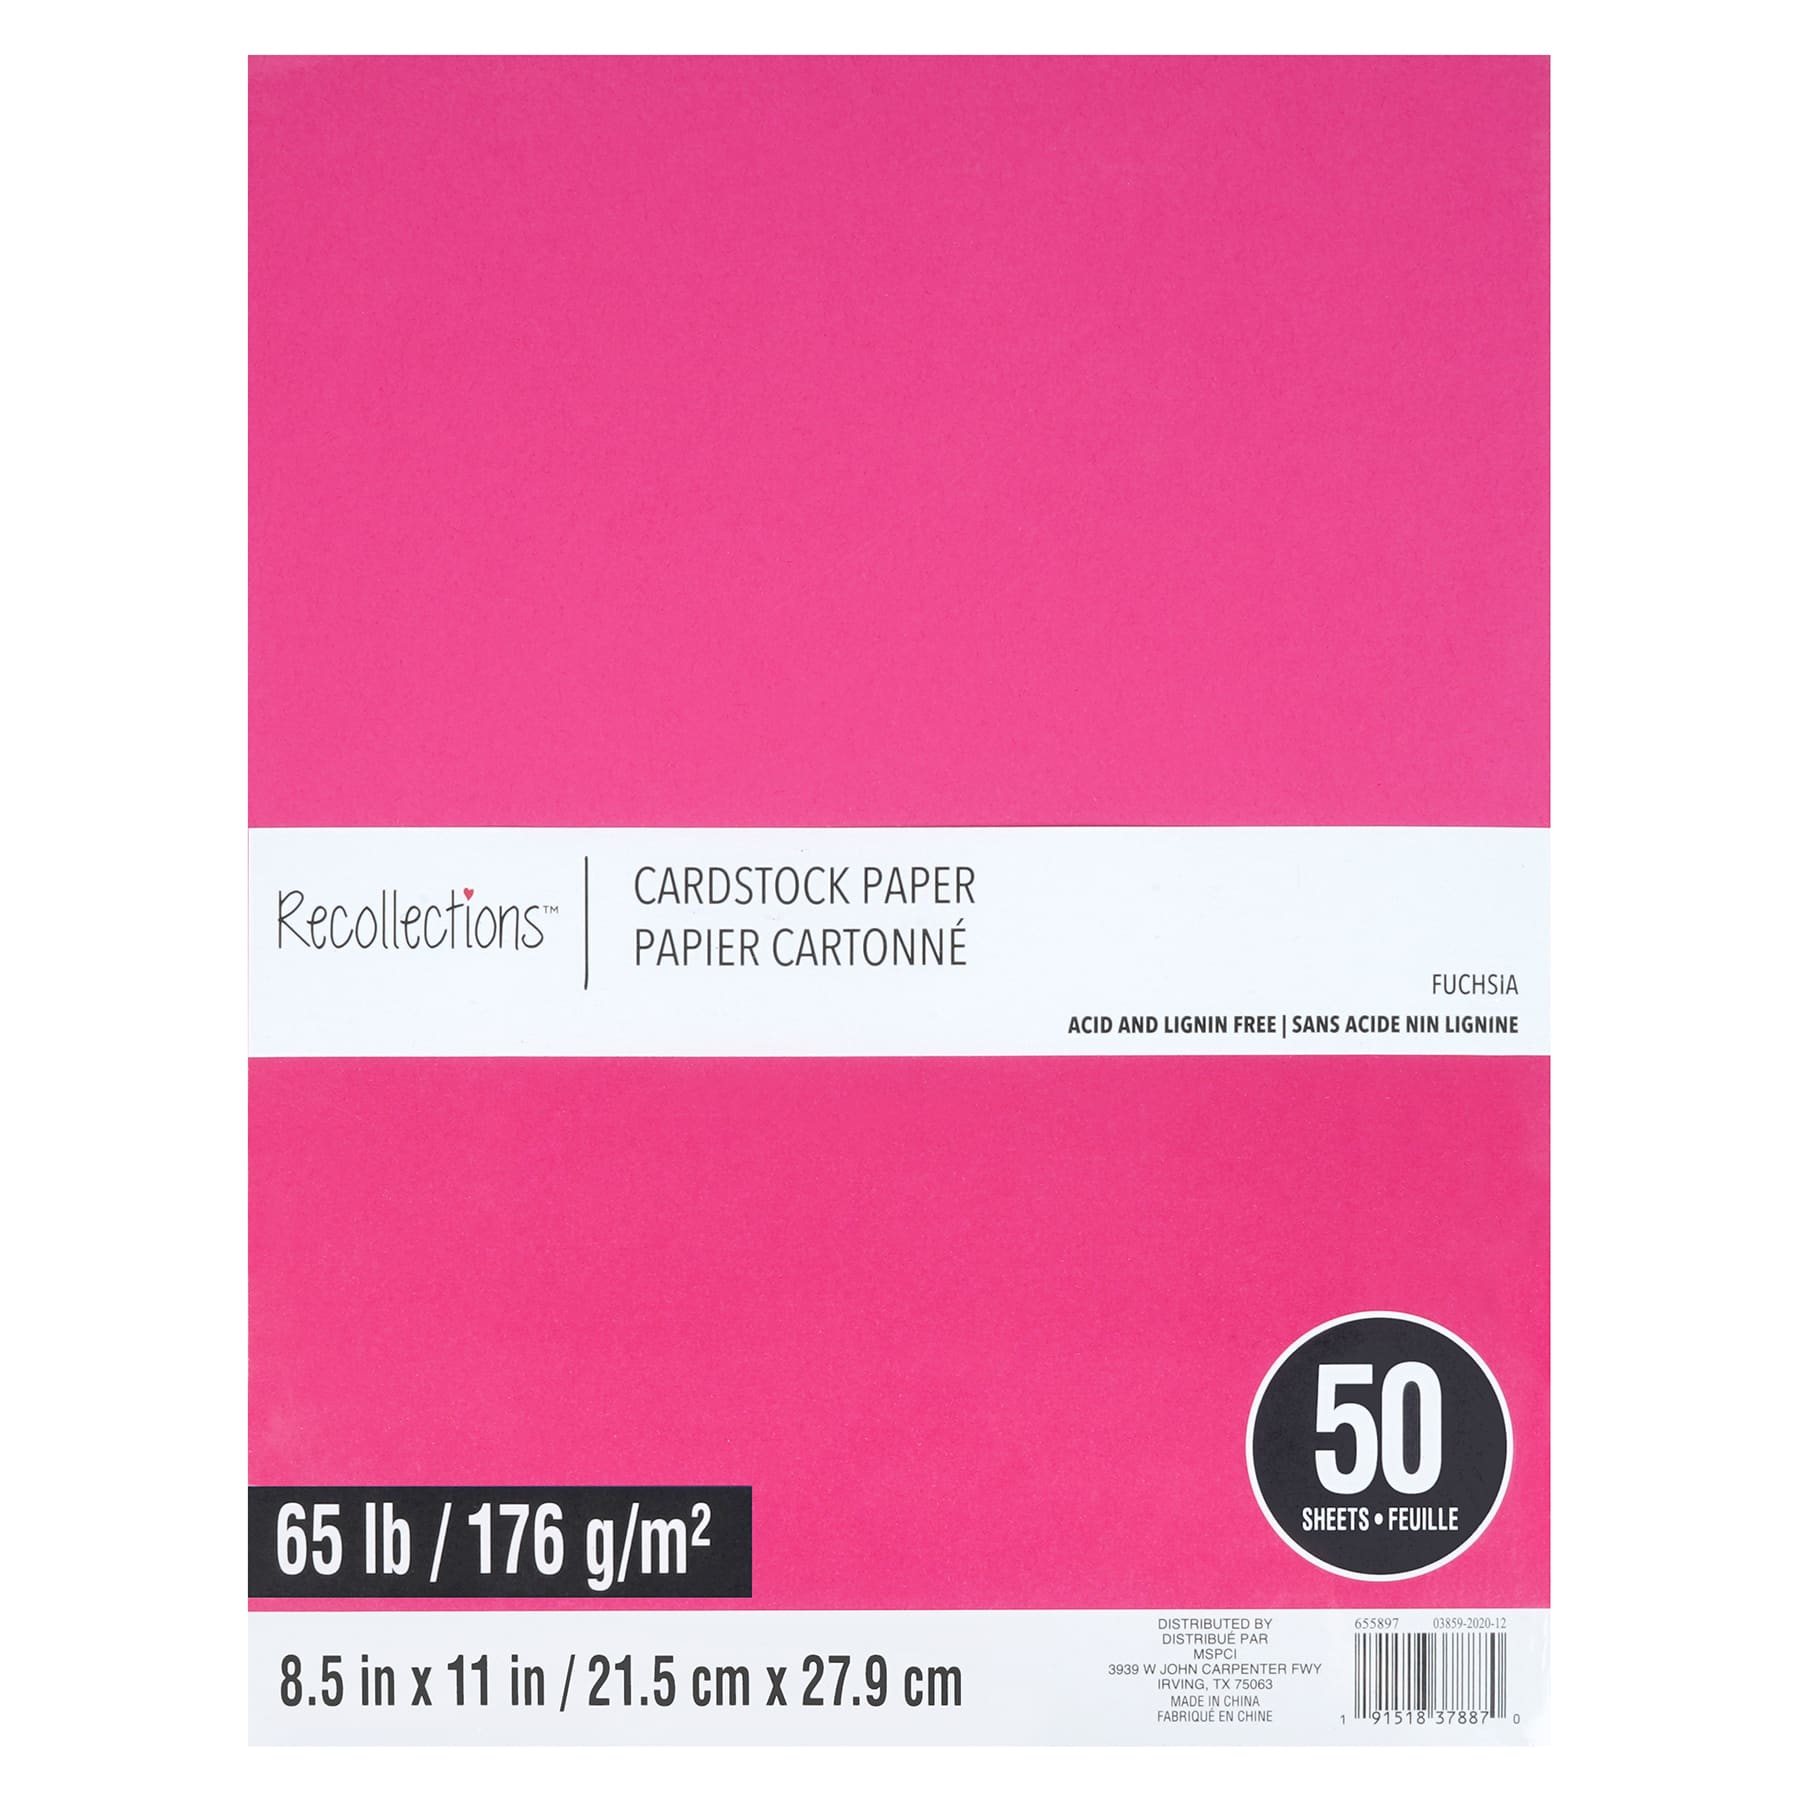 Pink Buttons 8.5 x 11 Cardstock Paper by Recollections®, 50 Sheets